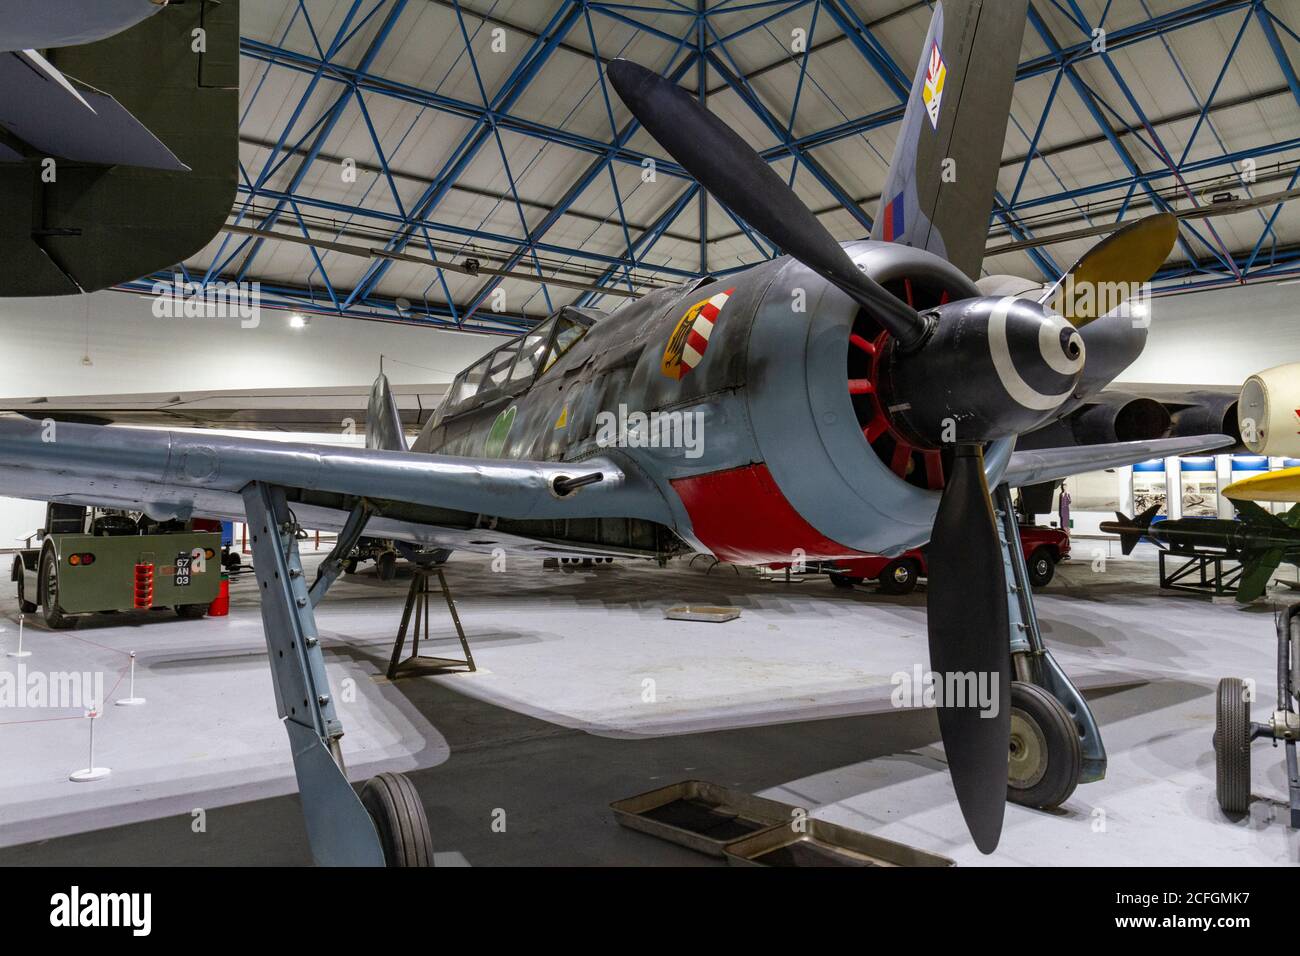 A Focke Wulf Fw190 fighter aircraft (1941-45) on display in the RAF Museum, London, UK. Stock Photo